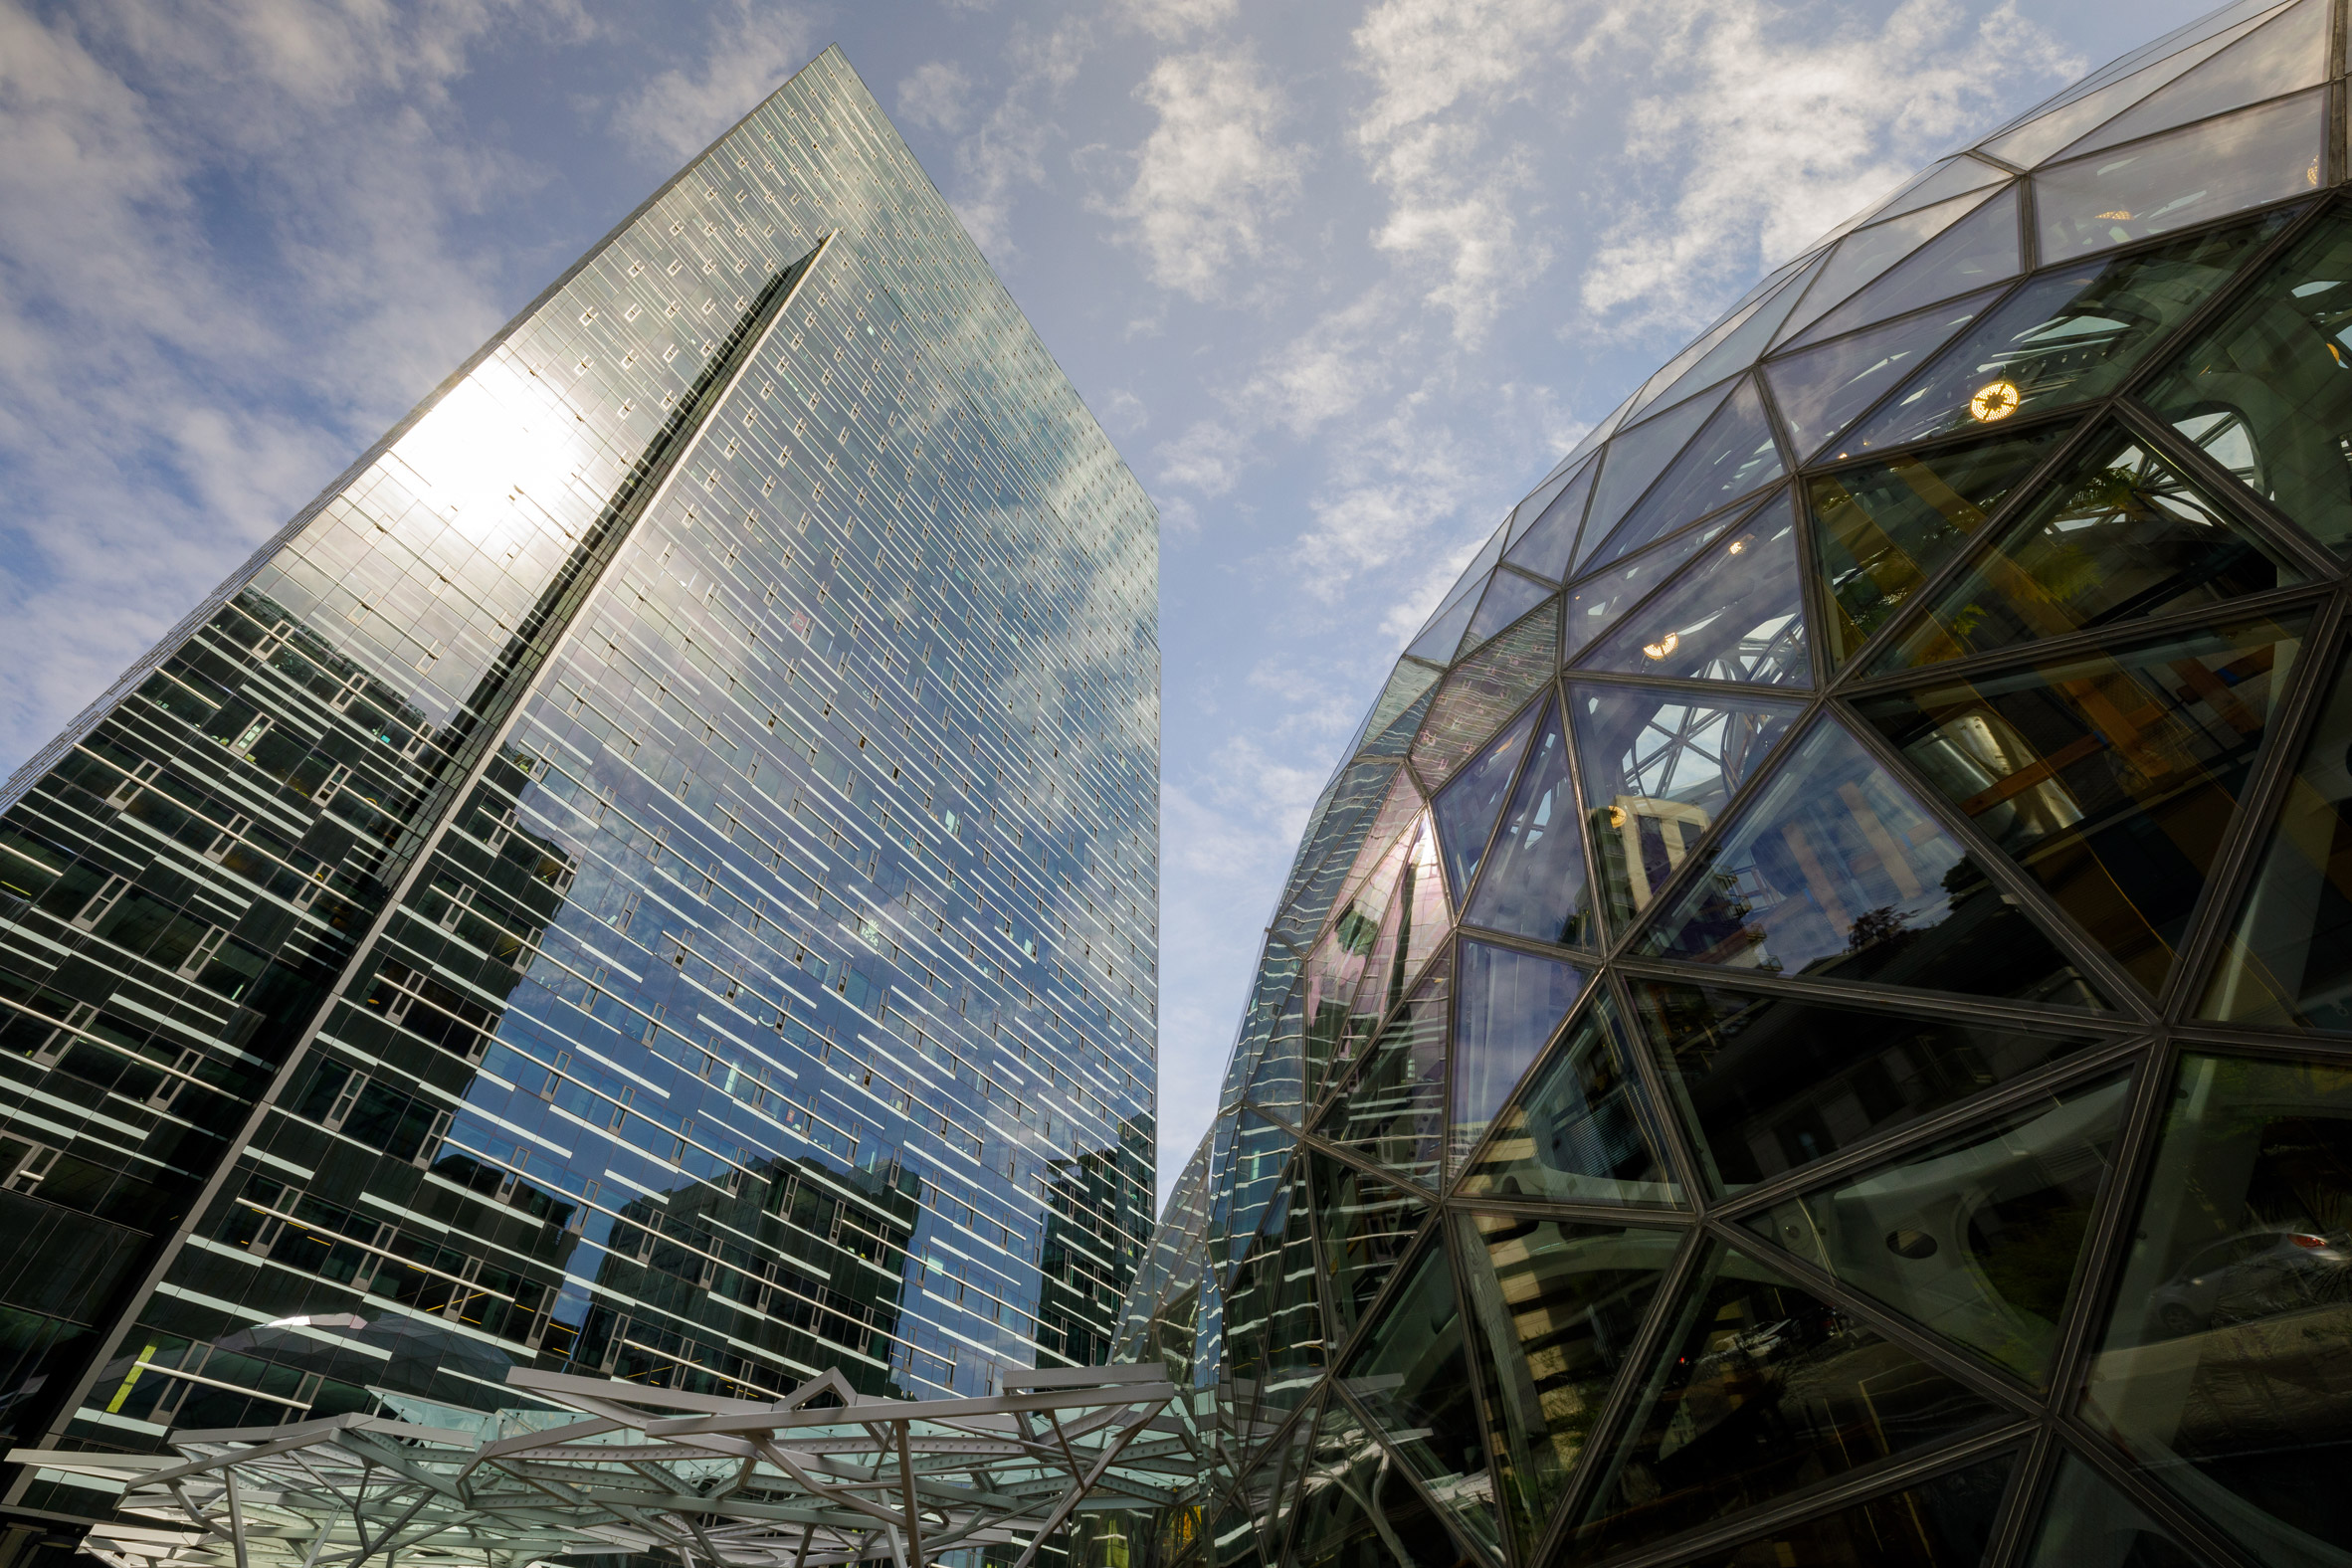 Plant-filled spheres open at Amazon headquarters in Seattle